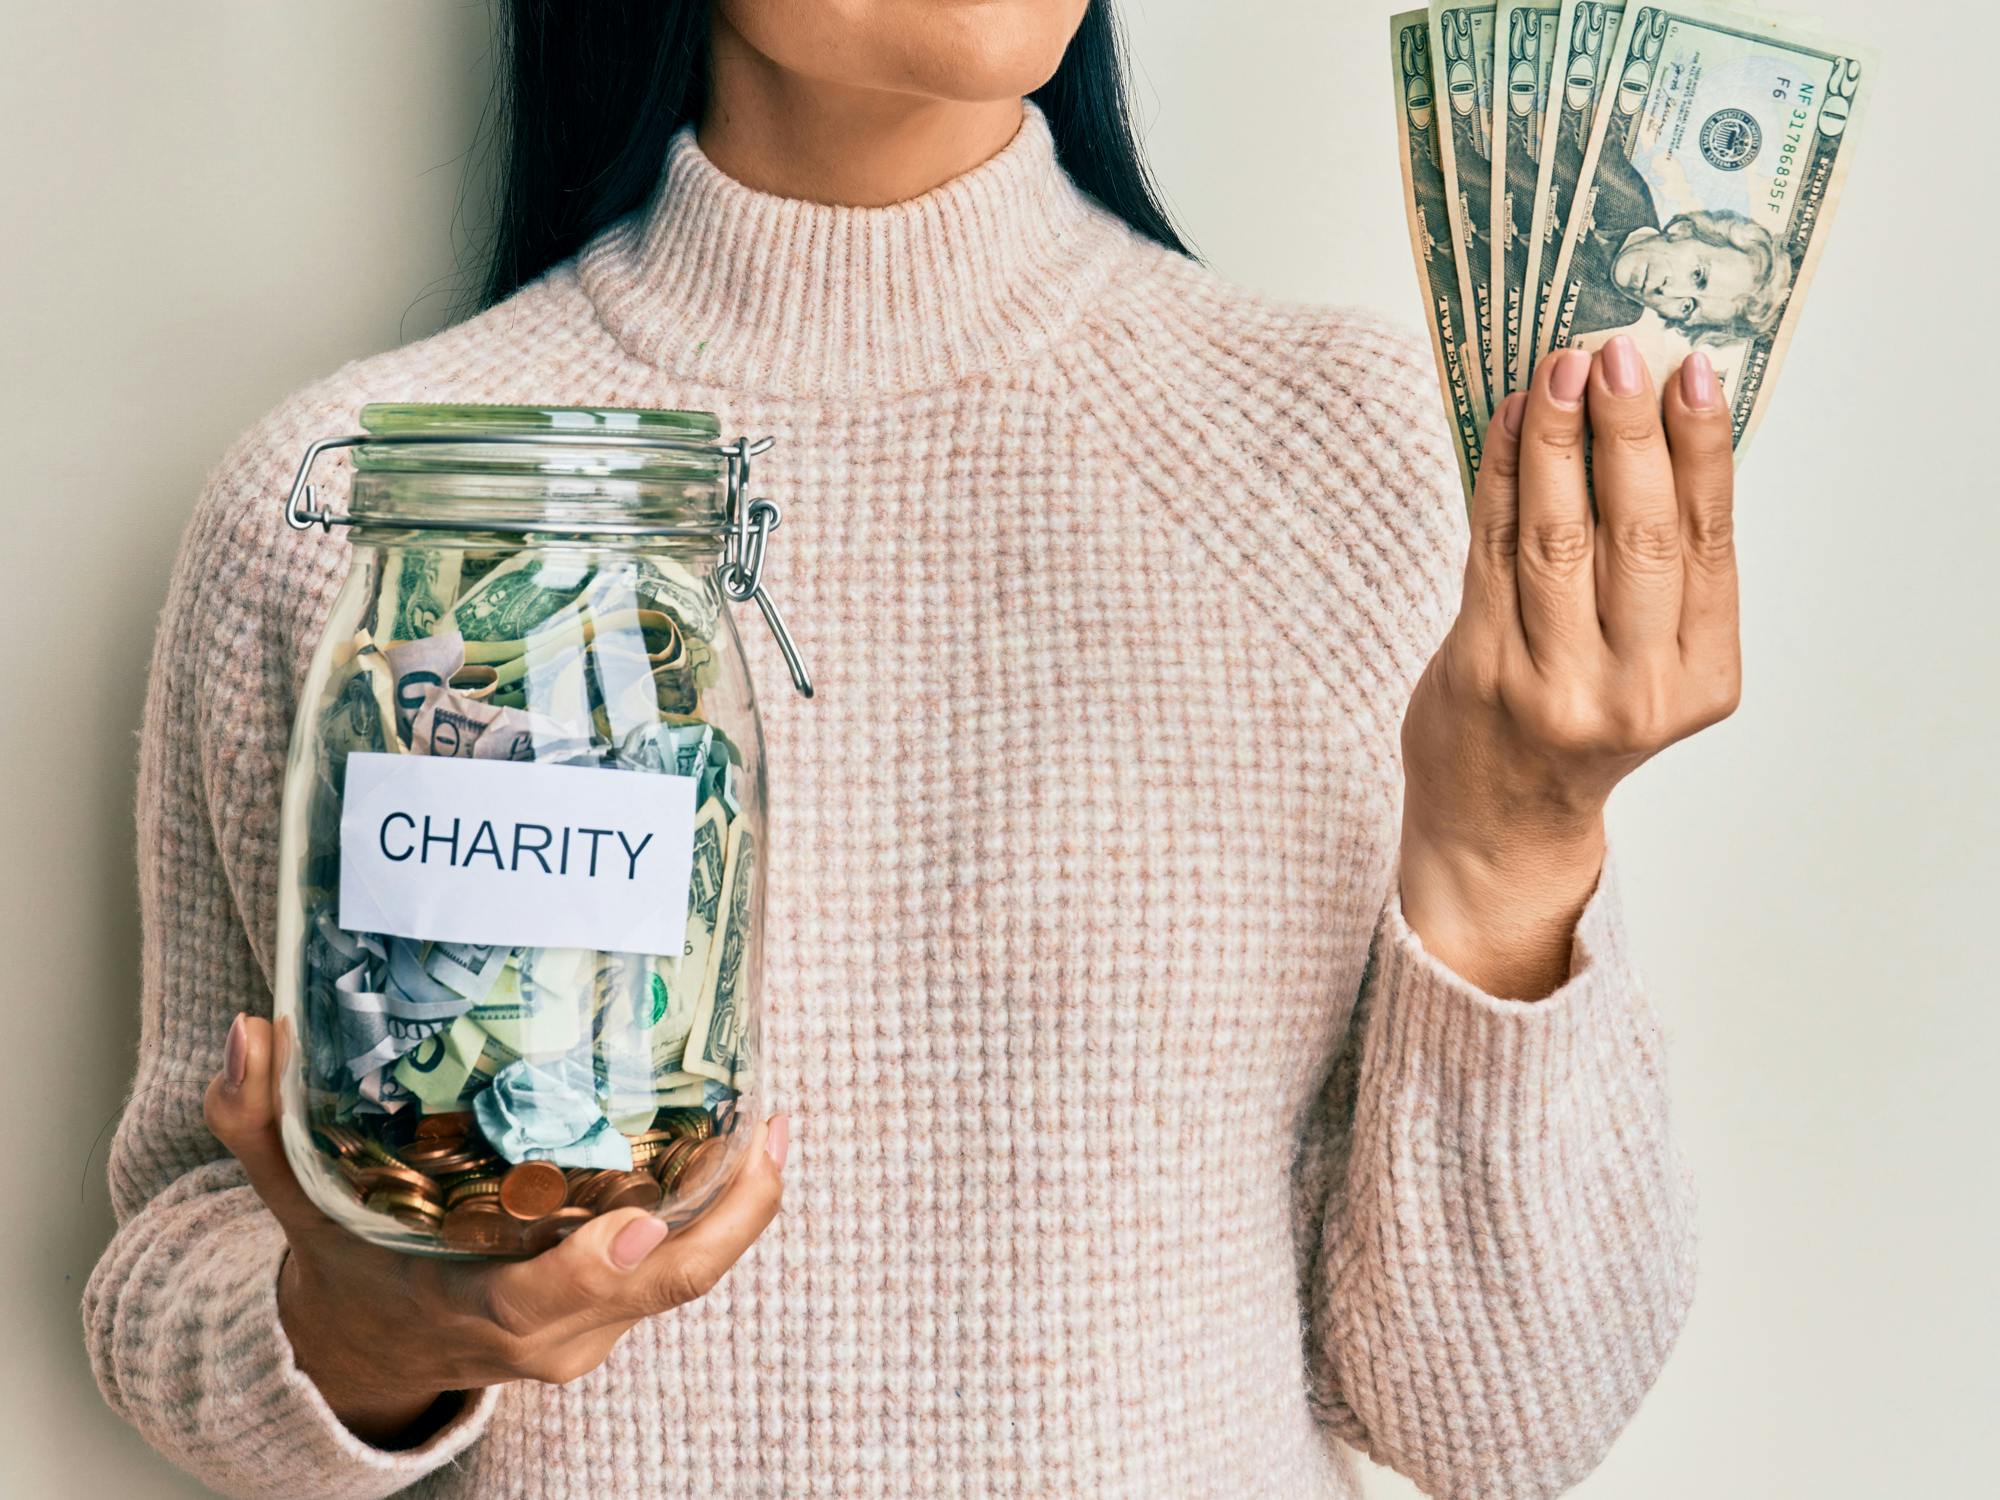 a person holding a charity jar and money smiling looking to the side